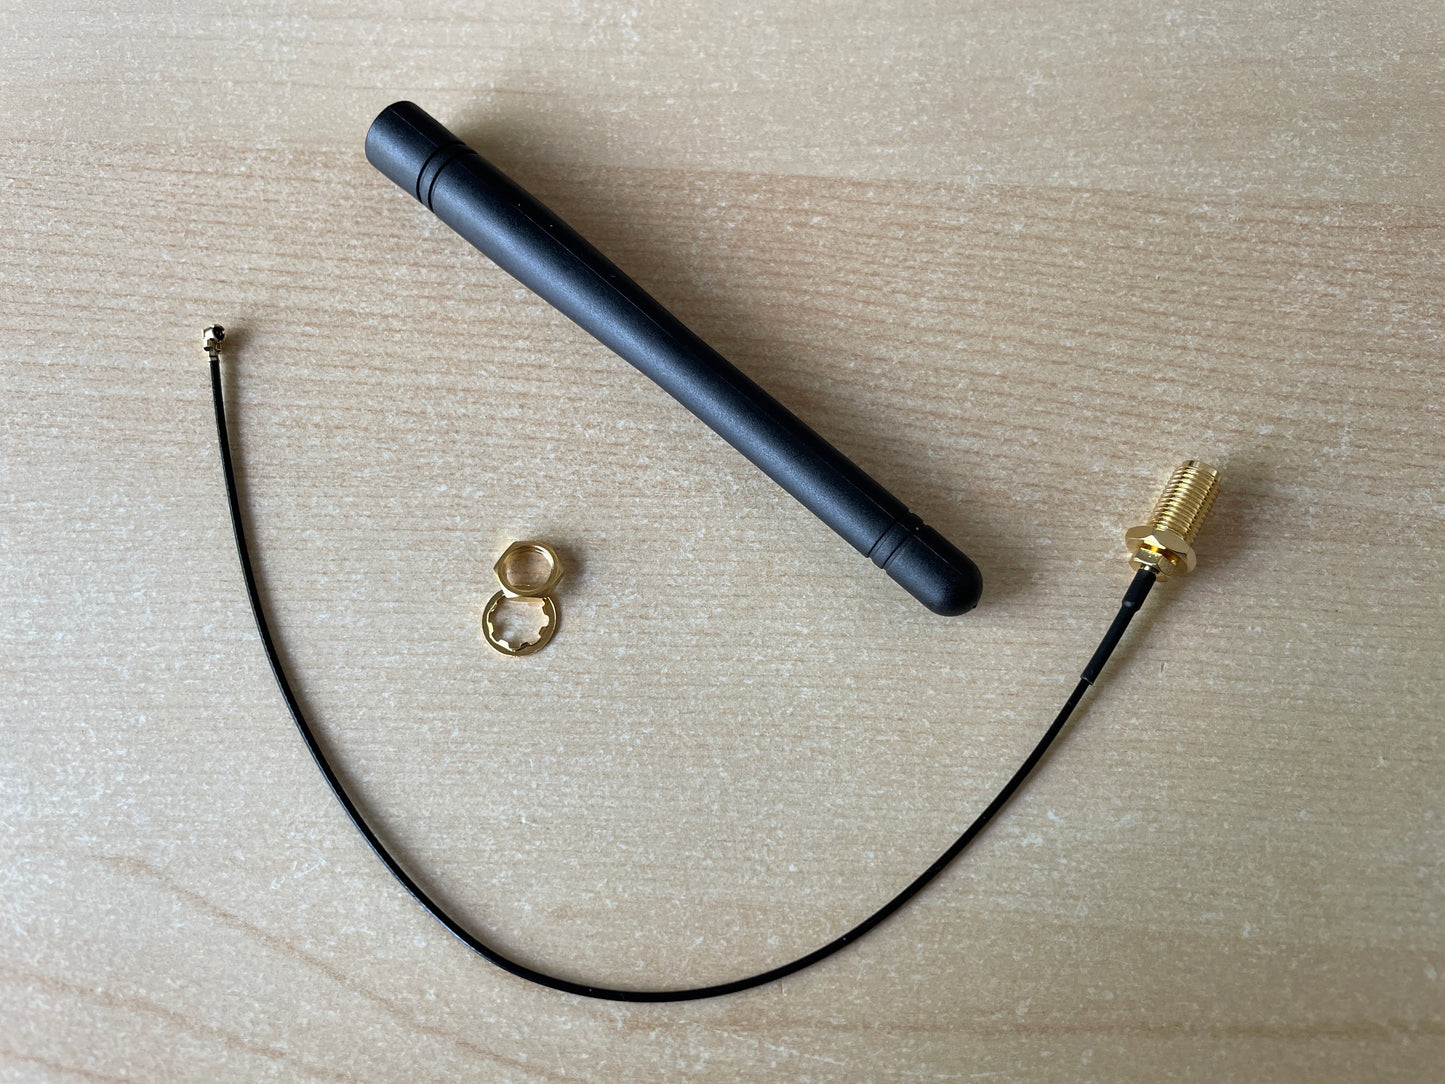 915Mhz 3dbi antenna (105mm straight) - SMA Male with u.fl to SMA Female pigtail extension